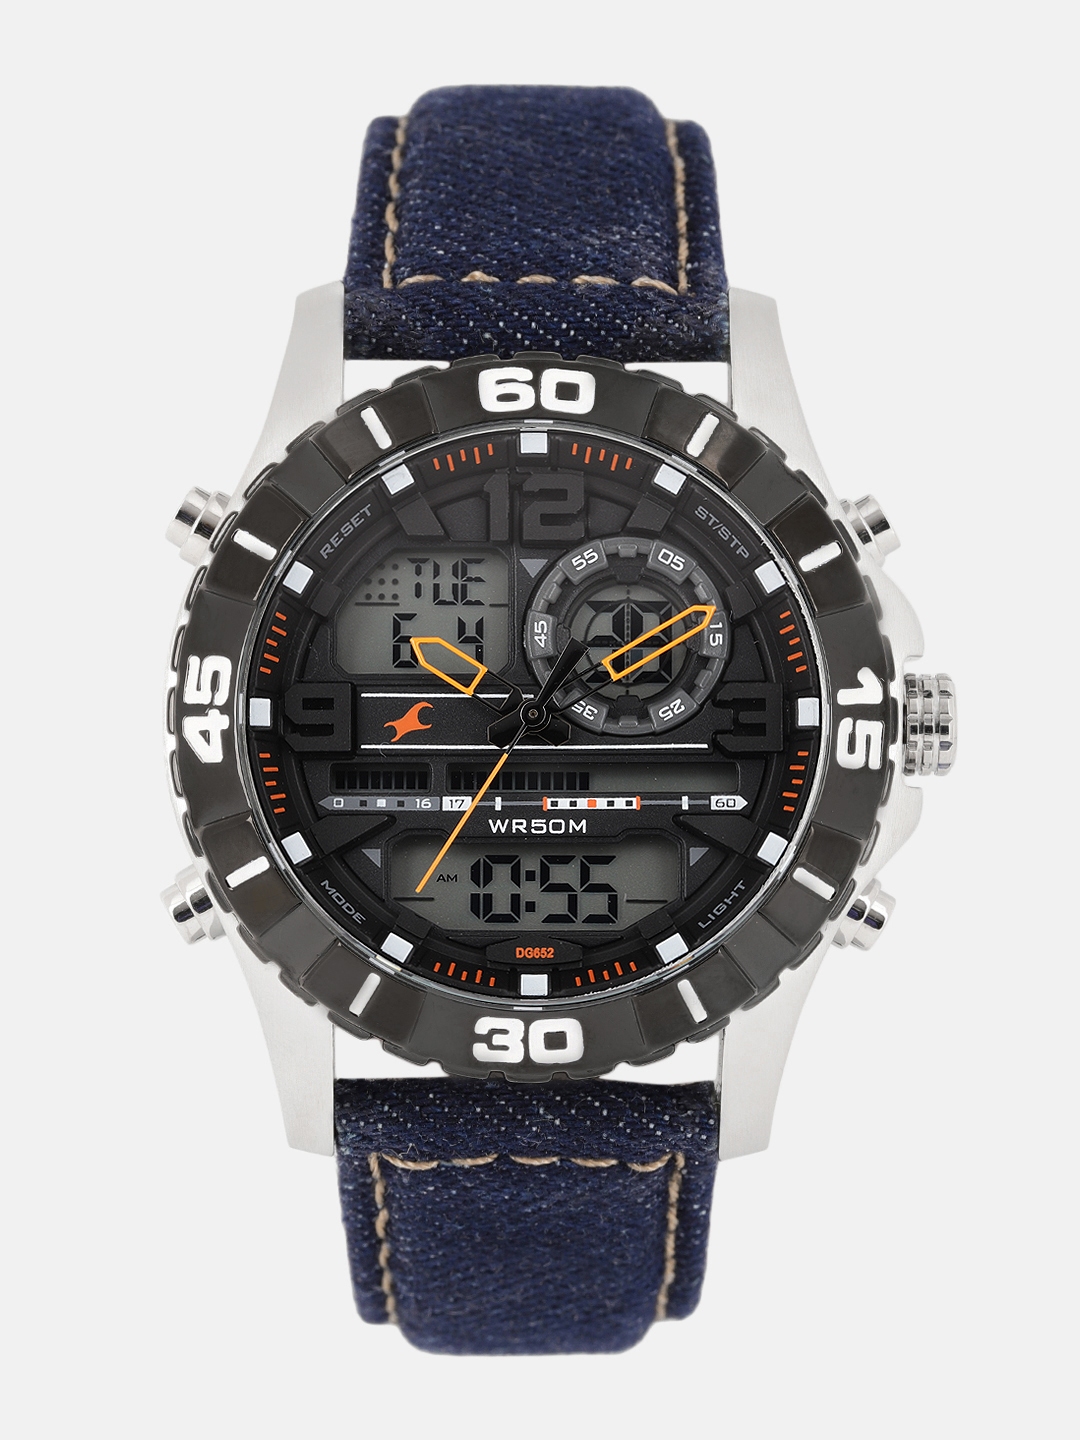 fastrack digital analogue watches